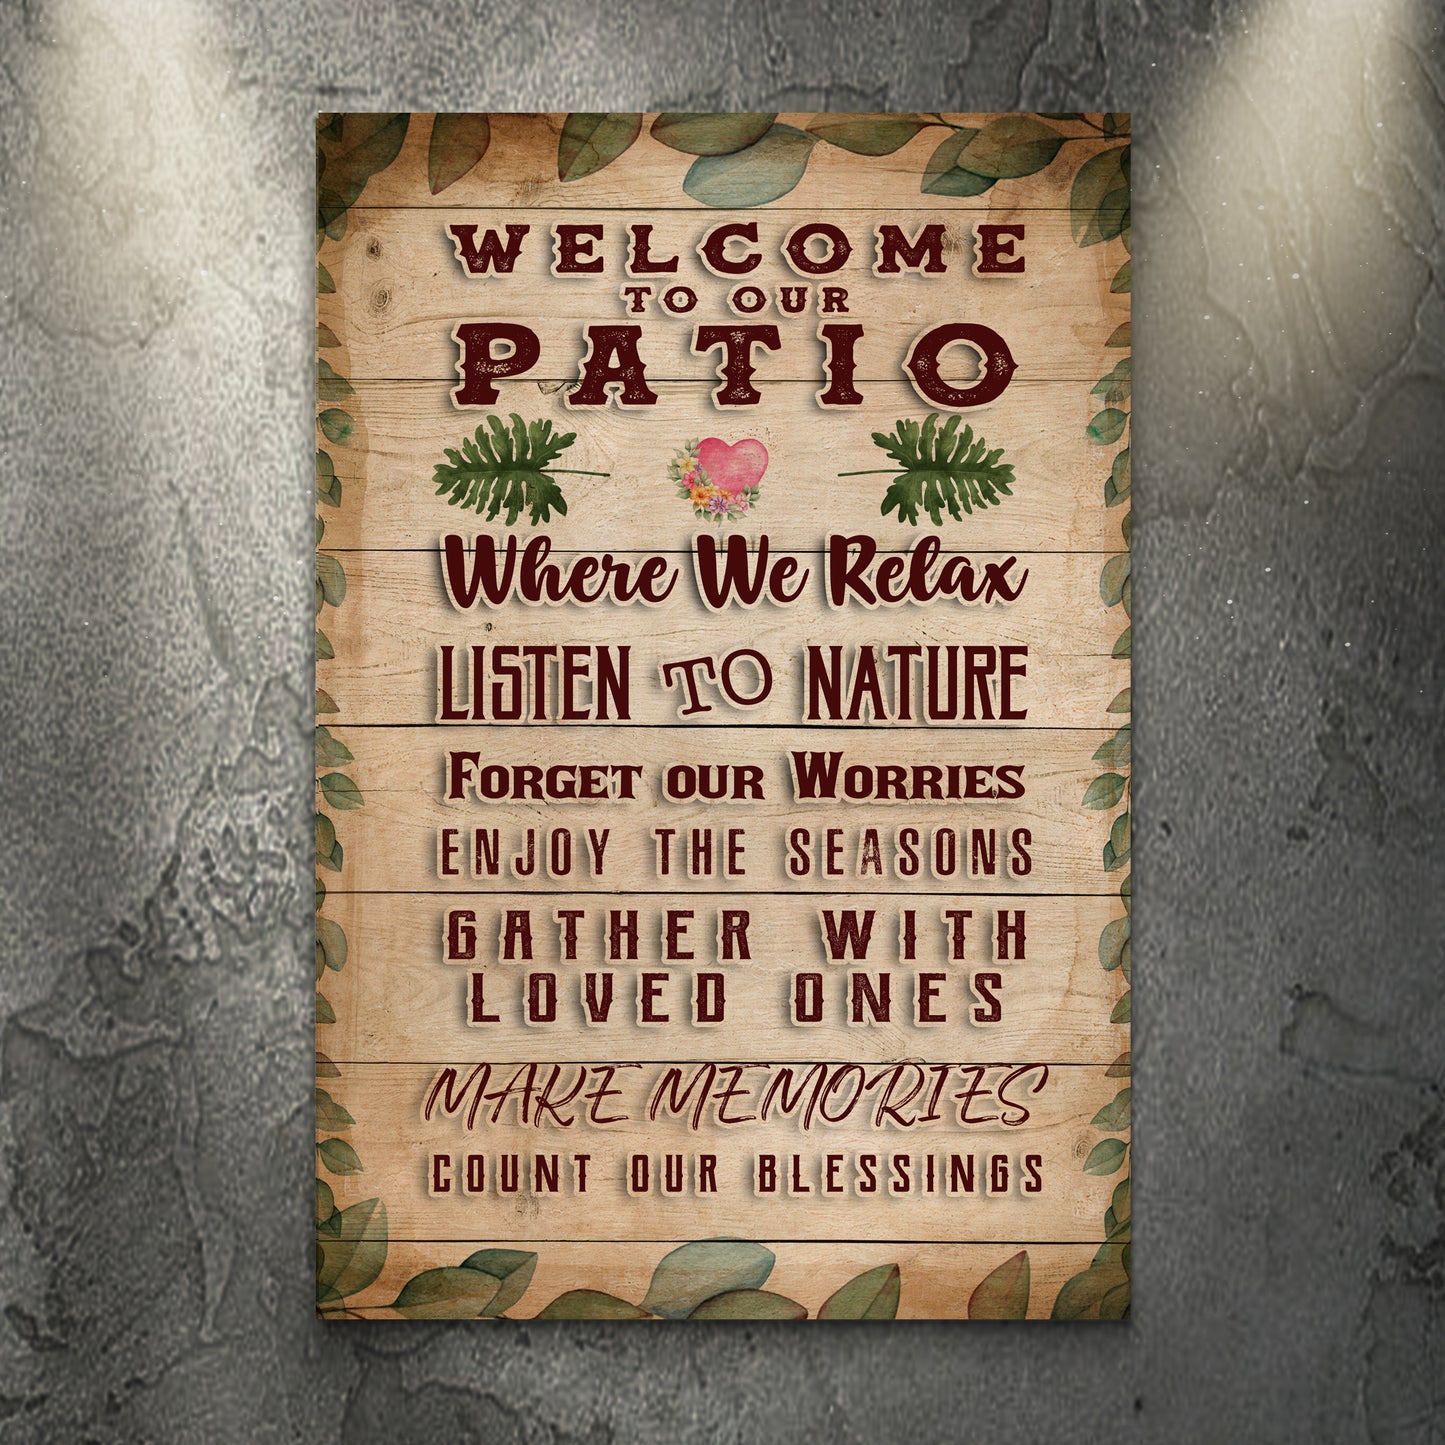 Welcome To Our Patio Where We Relax Sign - Image by Tailored Canvases